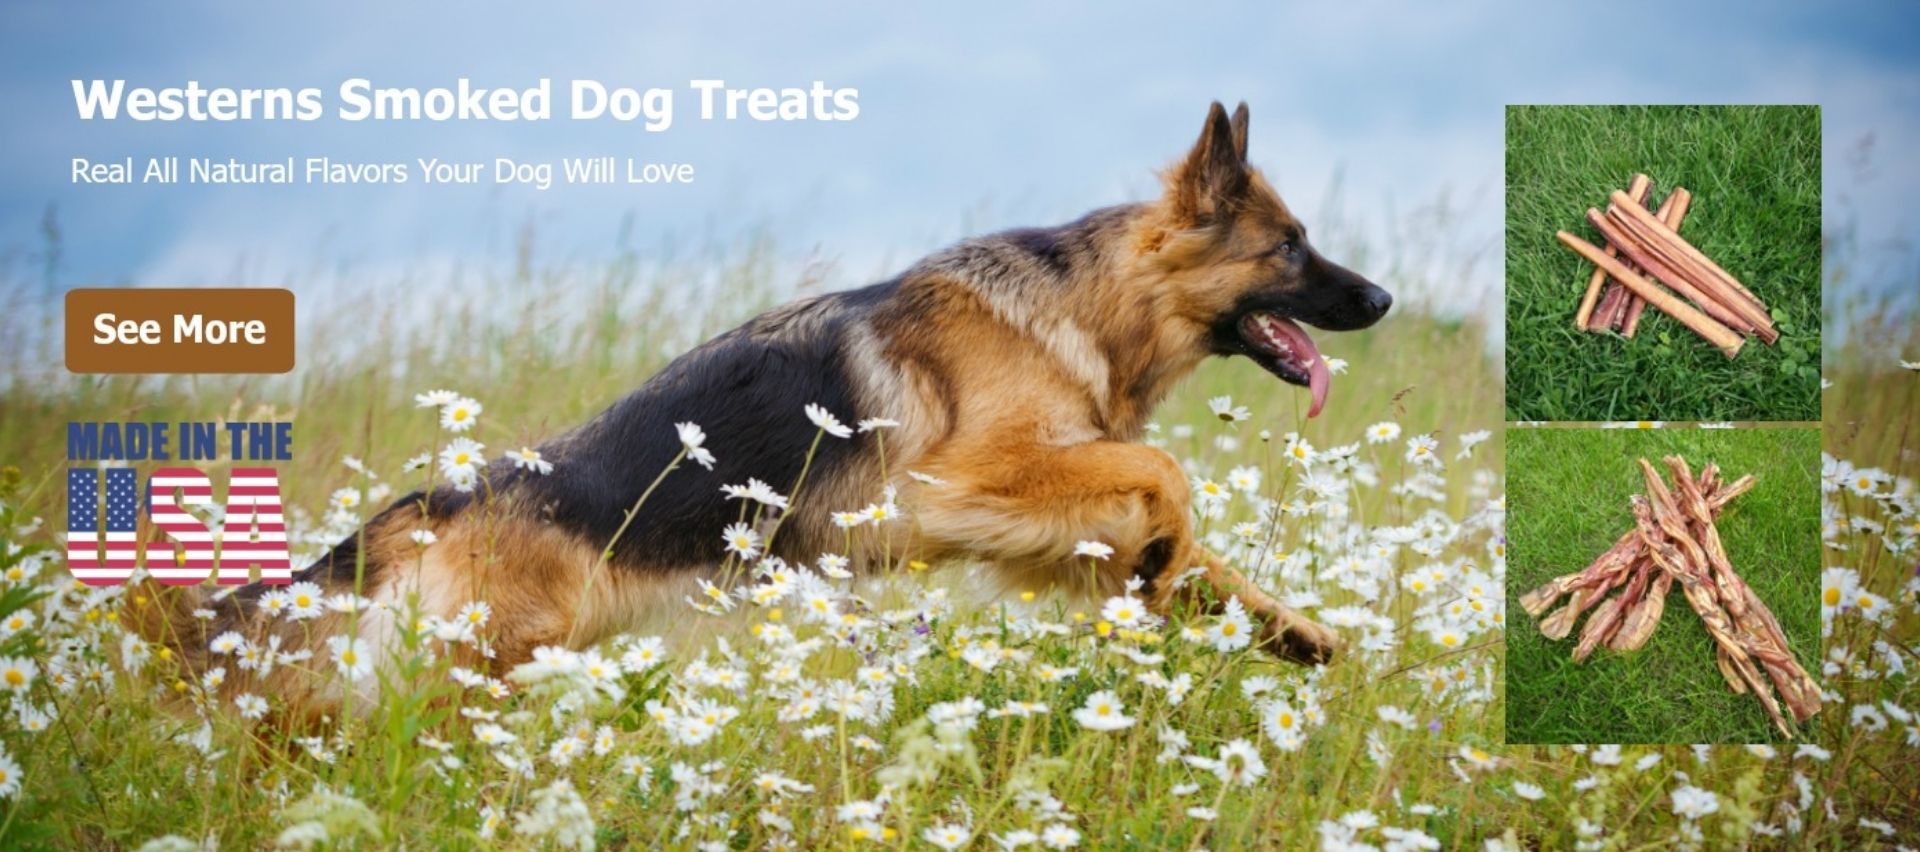 Westerns Smoked Dog Treats Real All Natural Smoked Flavors Your Dog Will Love